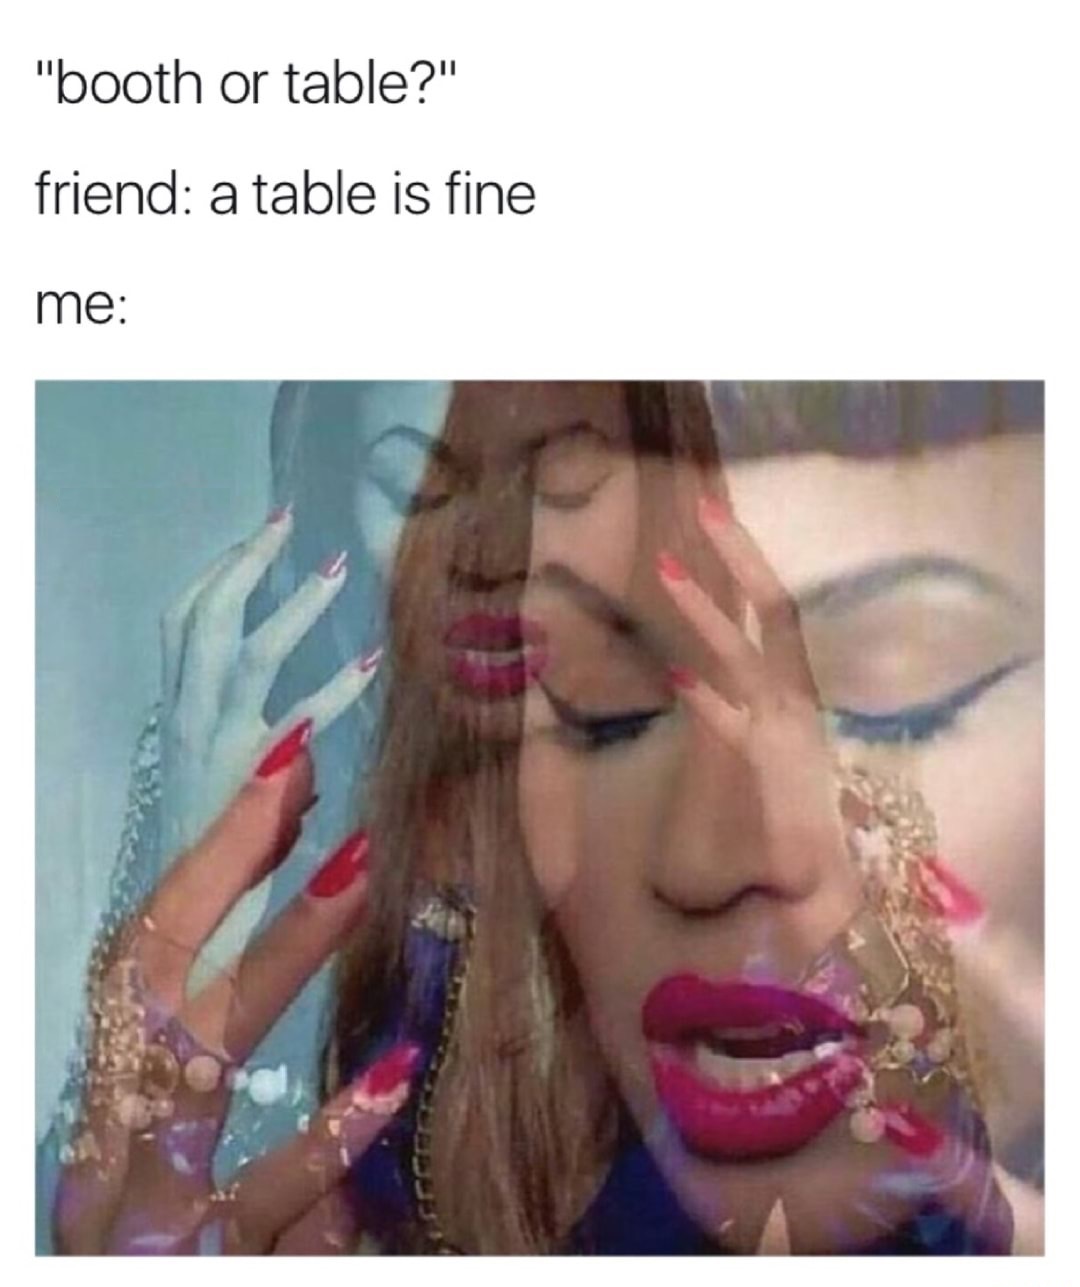 memes - kids misbehaving meme - "booth or table?" friend a table is fine me